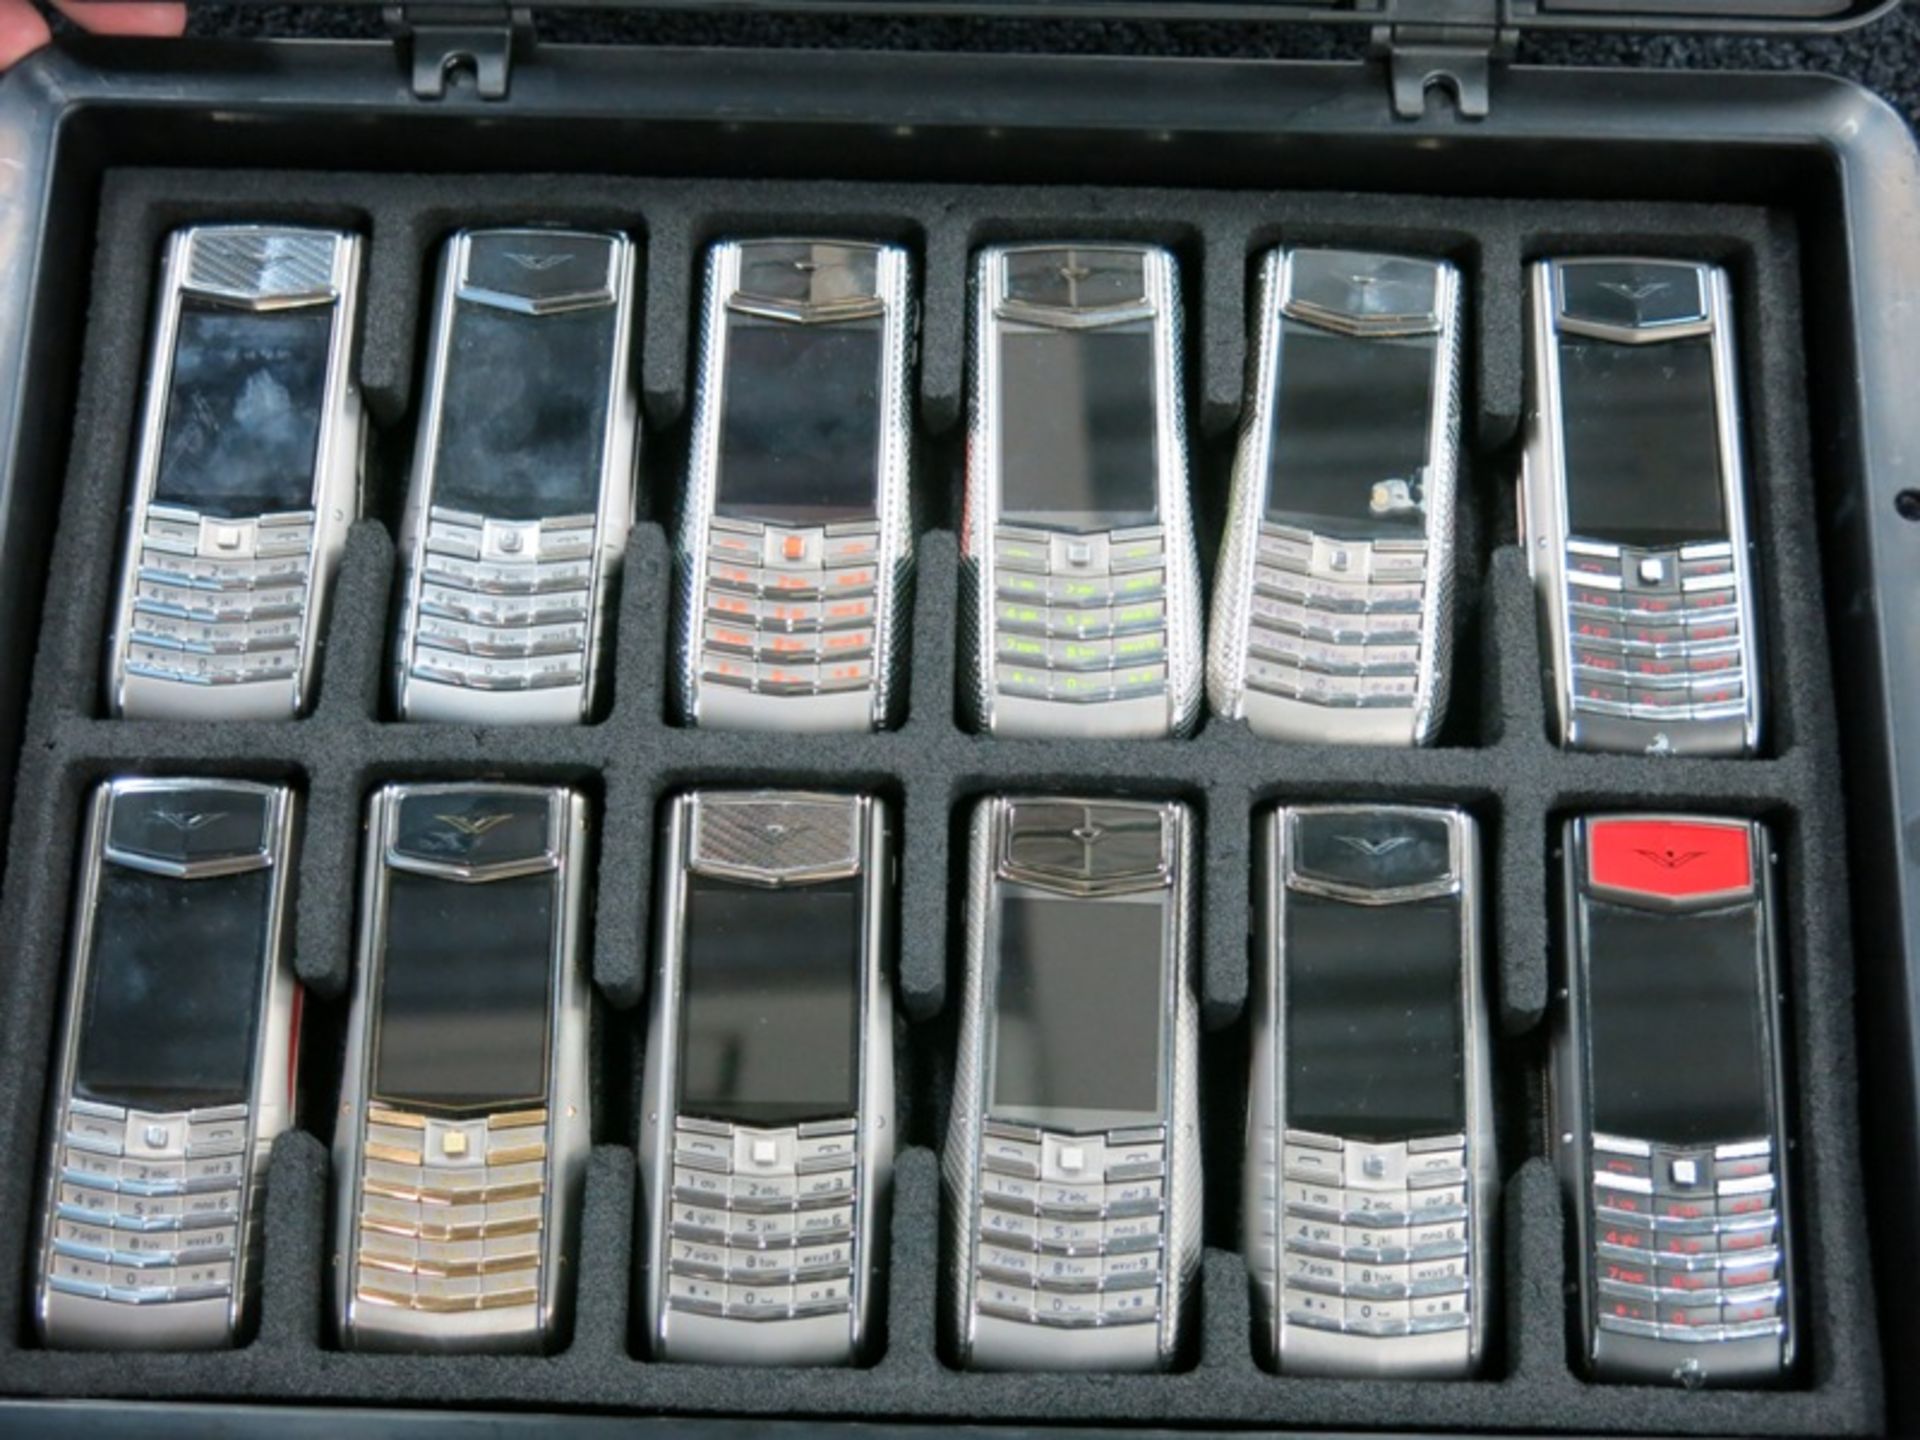 Archive Collection of 46 Vertu Ascent Ti Phones made of Titanium, Stainless Steel, Ceramic Pillow, - Image 3 of 4